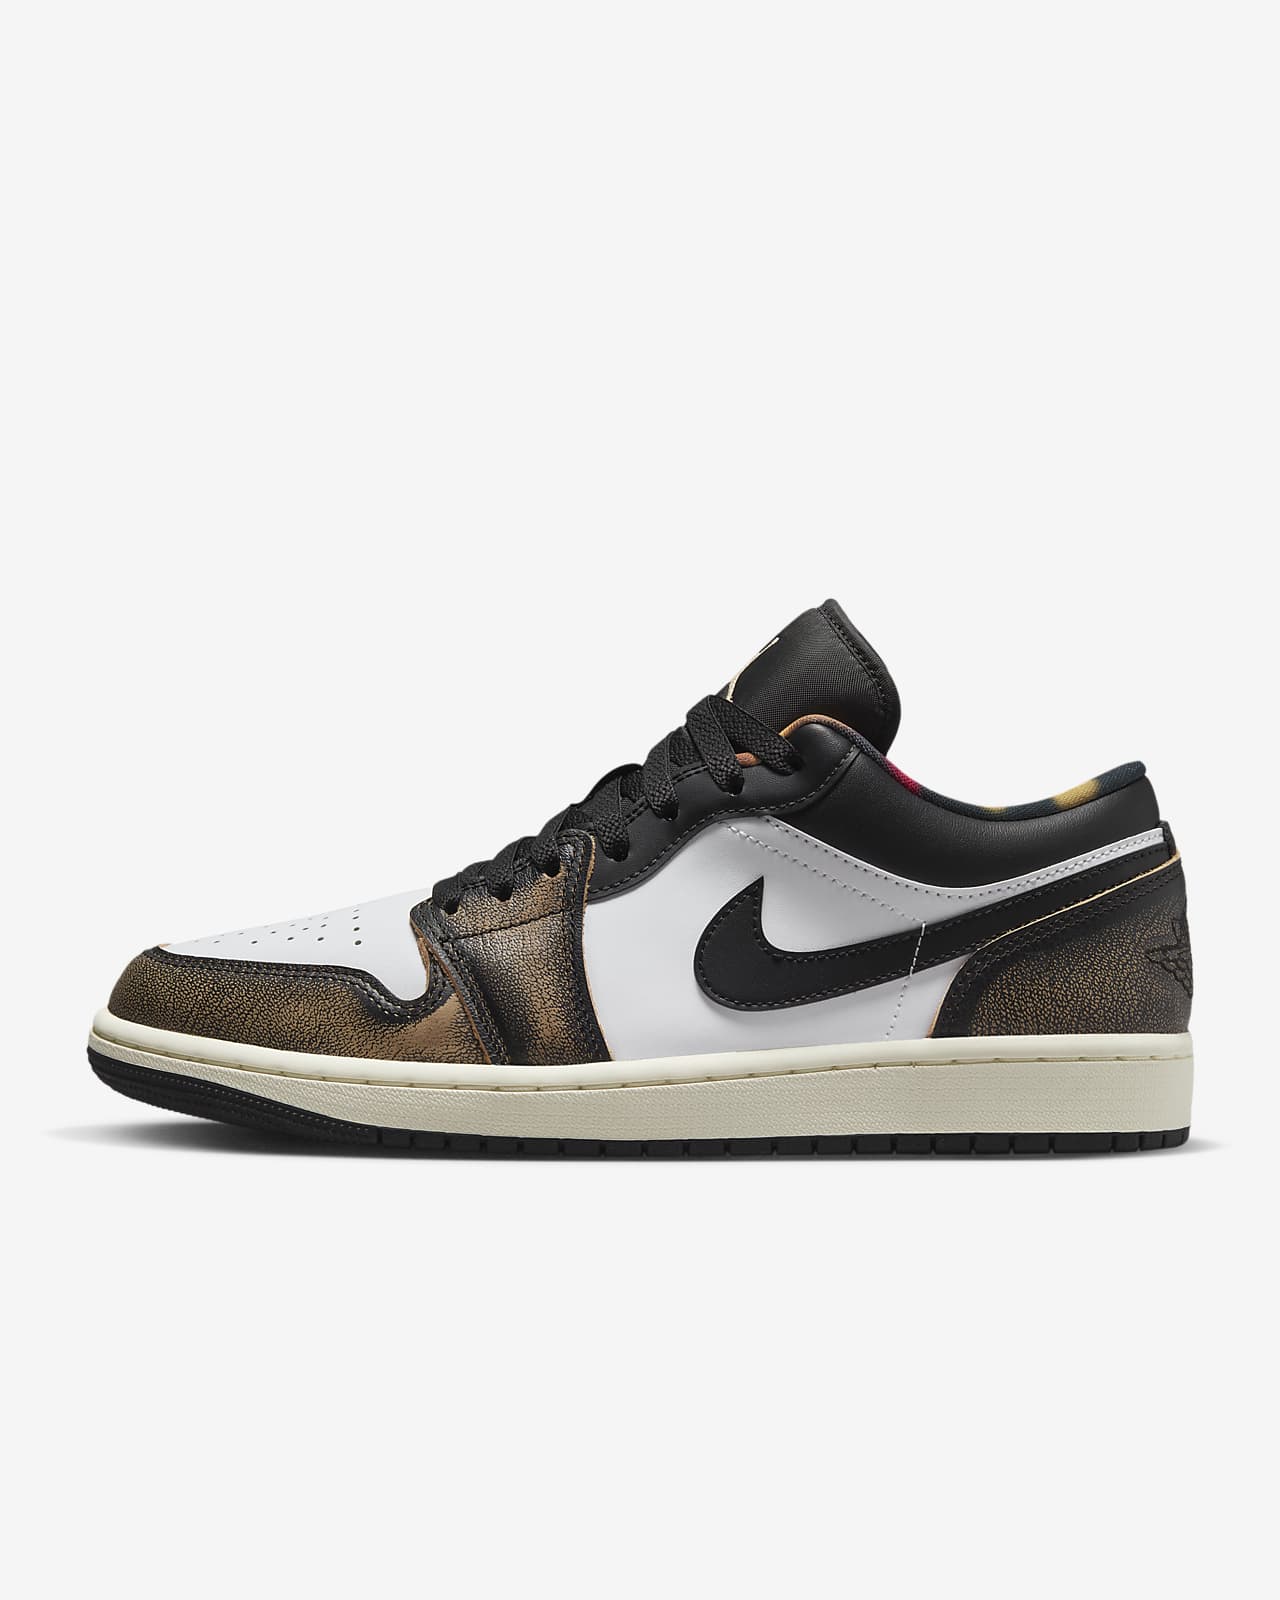 Wither Somatic cell Read Air Jordan 1 Low SE Men's Shoes. Nike.com